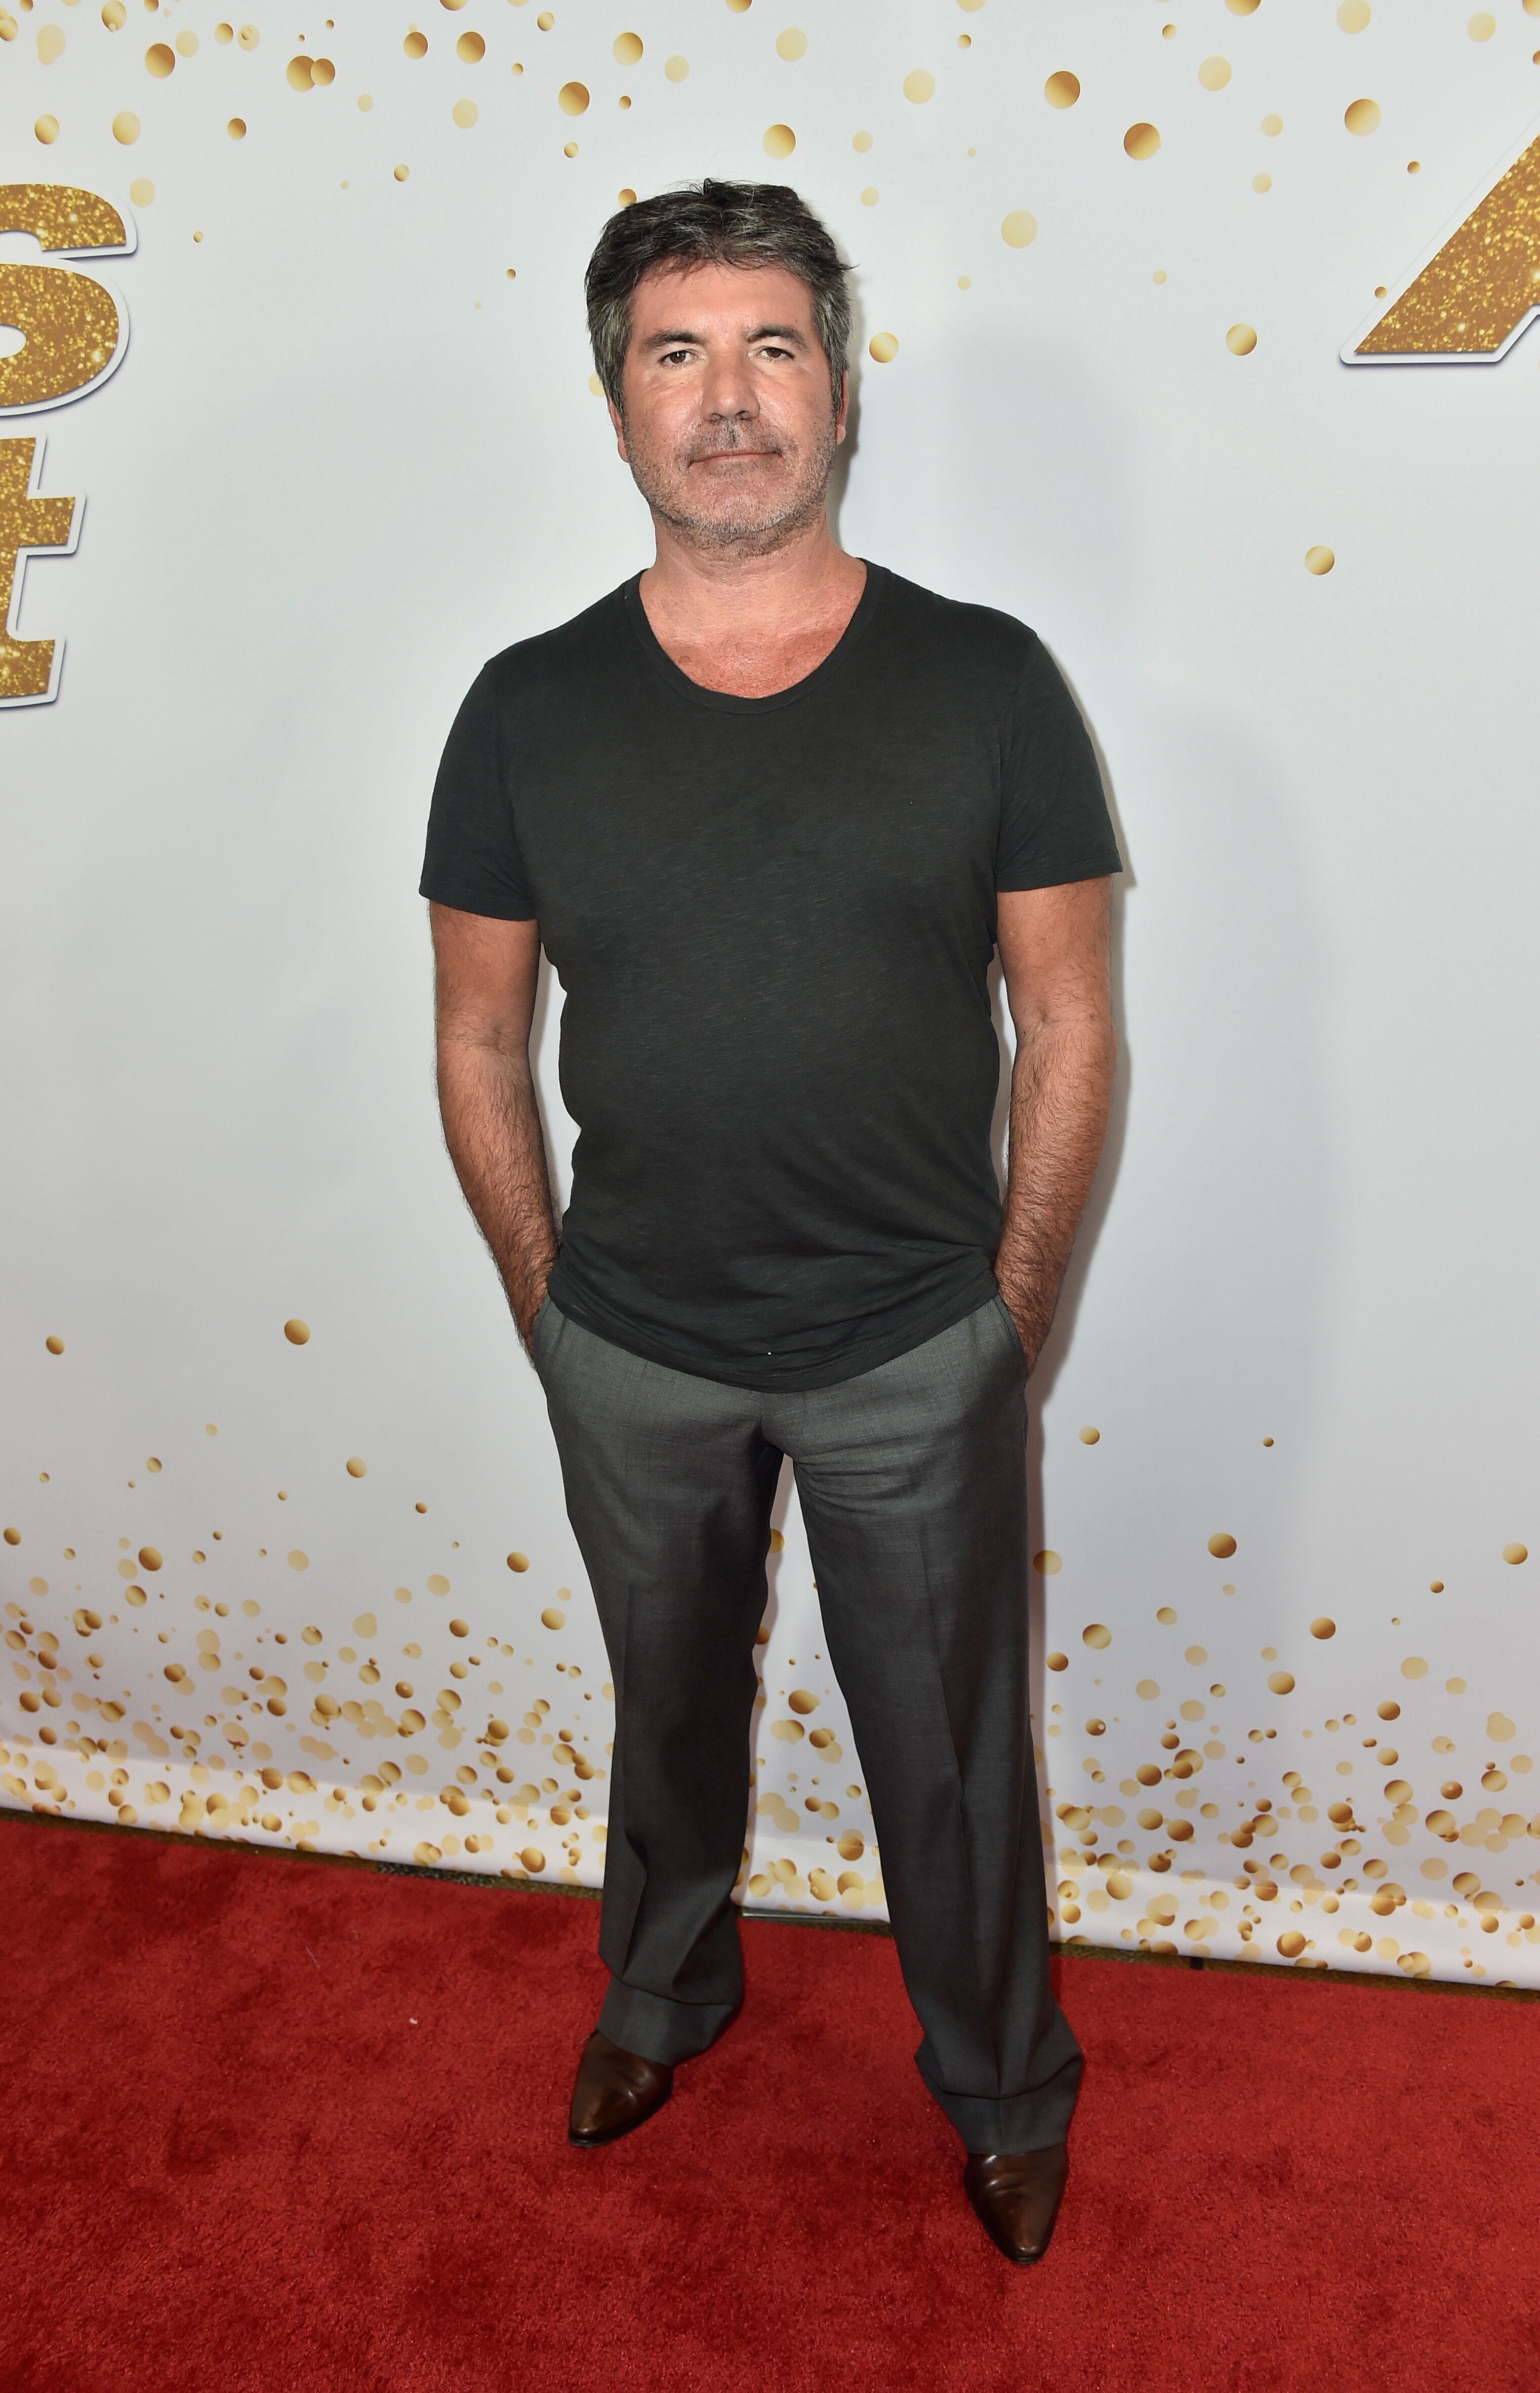 Simon Cowell attends "America's Got Talent" Season 13 Live Show Red Carpet | Getty Image / Global Images Ukraine